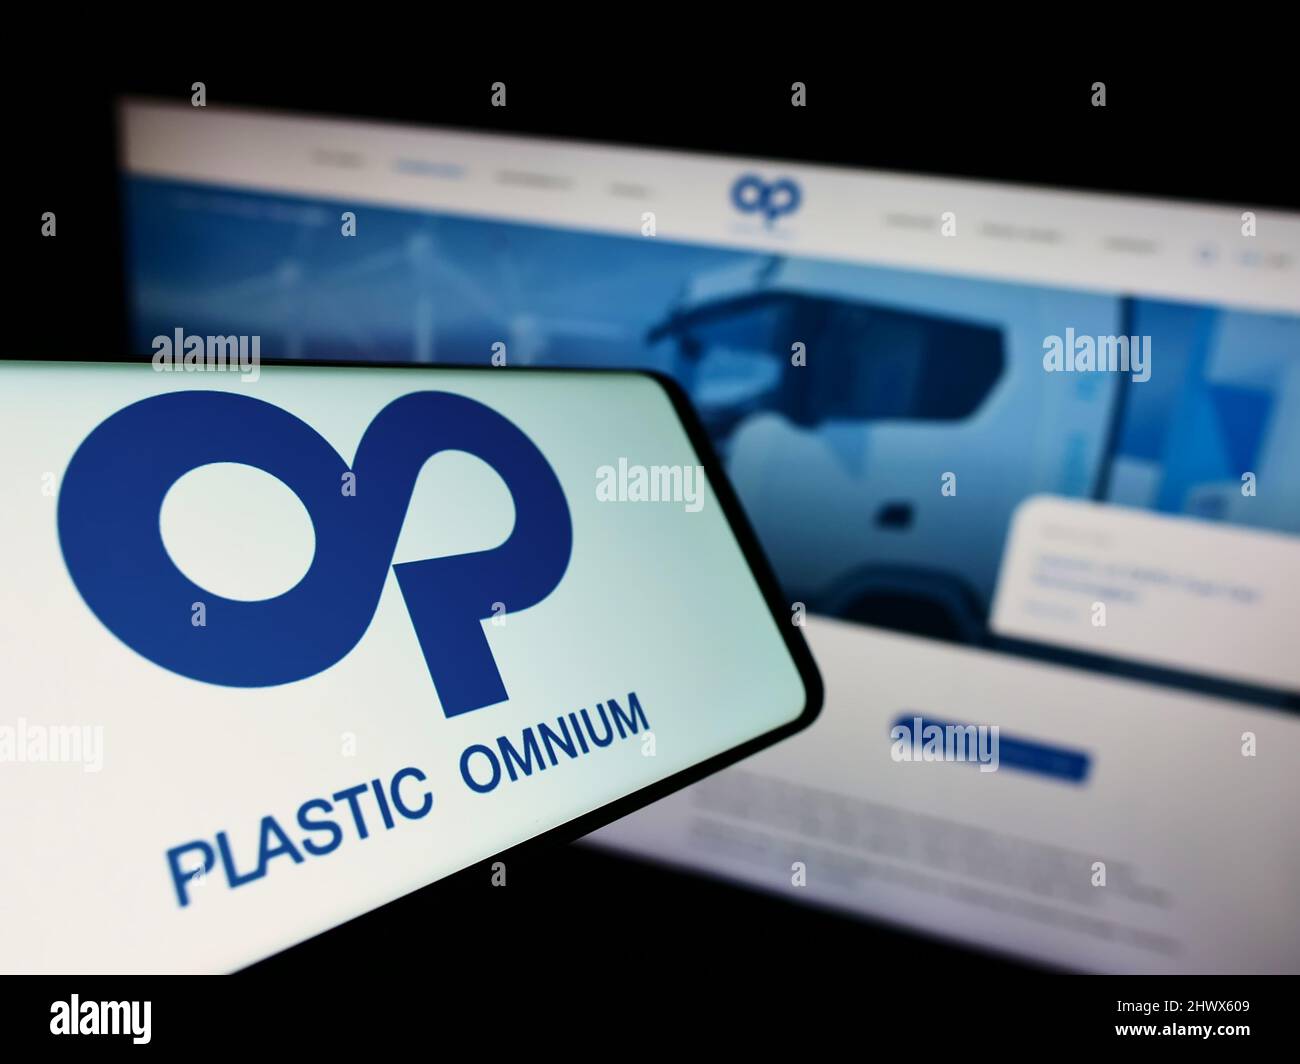 Cellphone with logo of French company Compagnie Plastic Omnium SA on screen in front of business website. Focus on center-right of phone display. Stock Photo